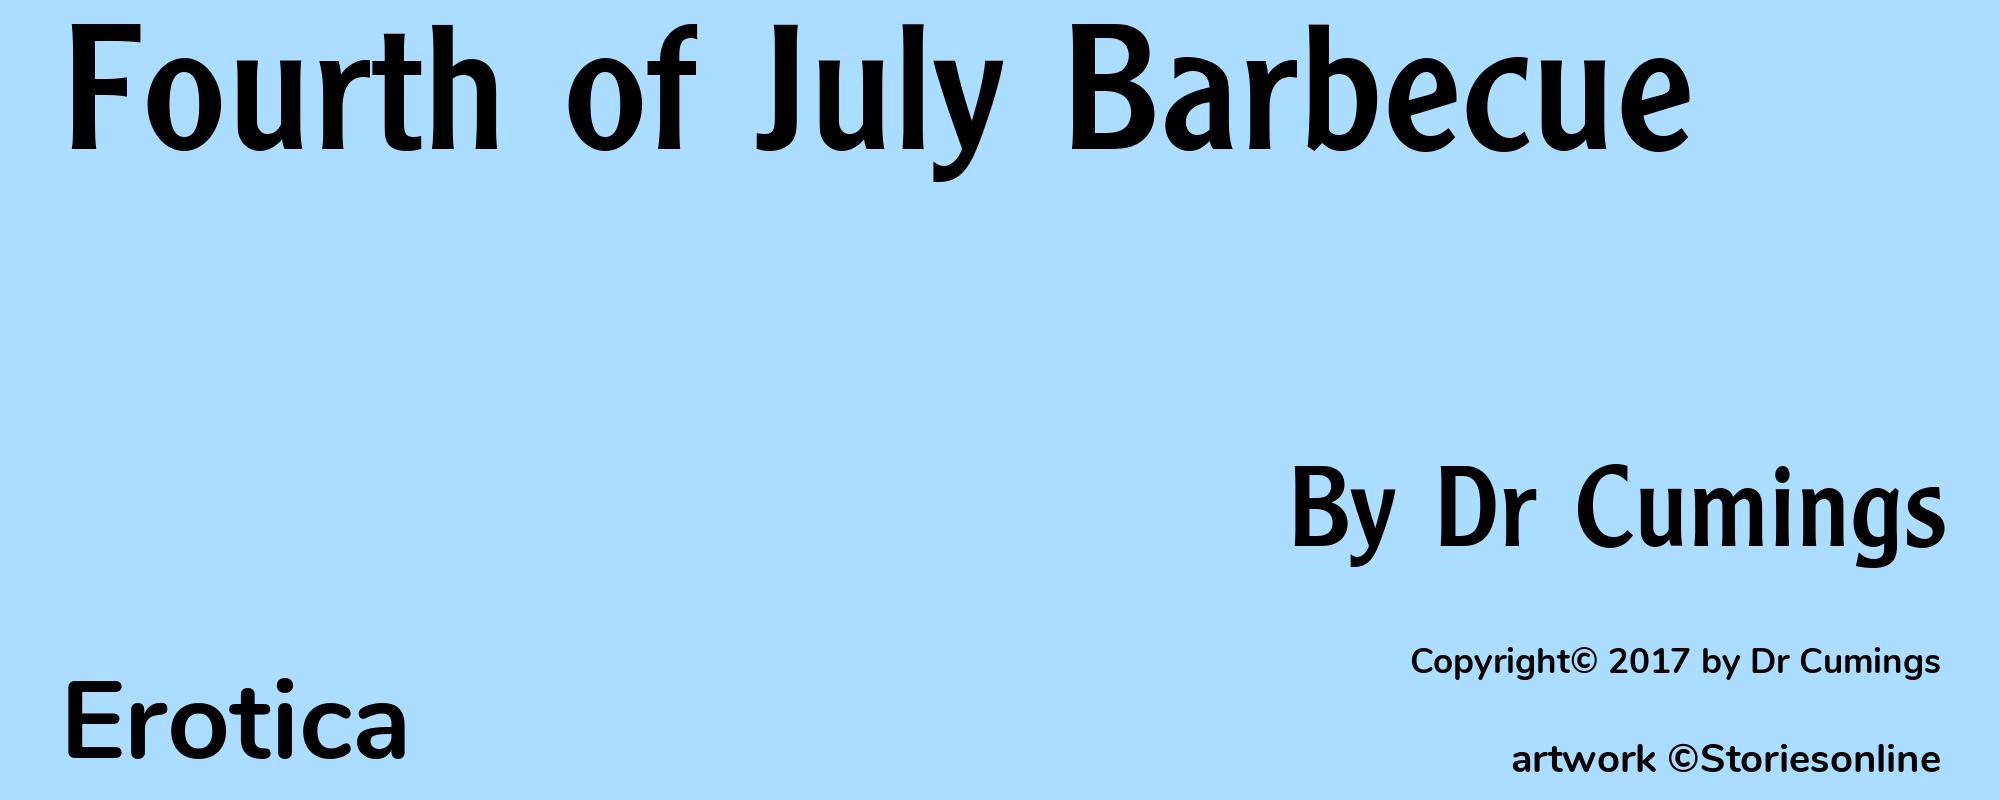 Fourth of July Barbecue - Cover